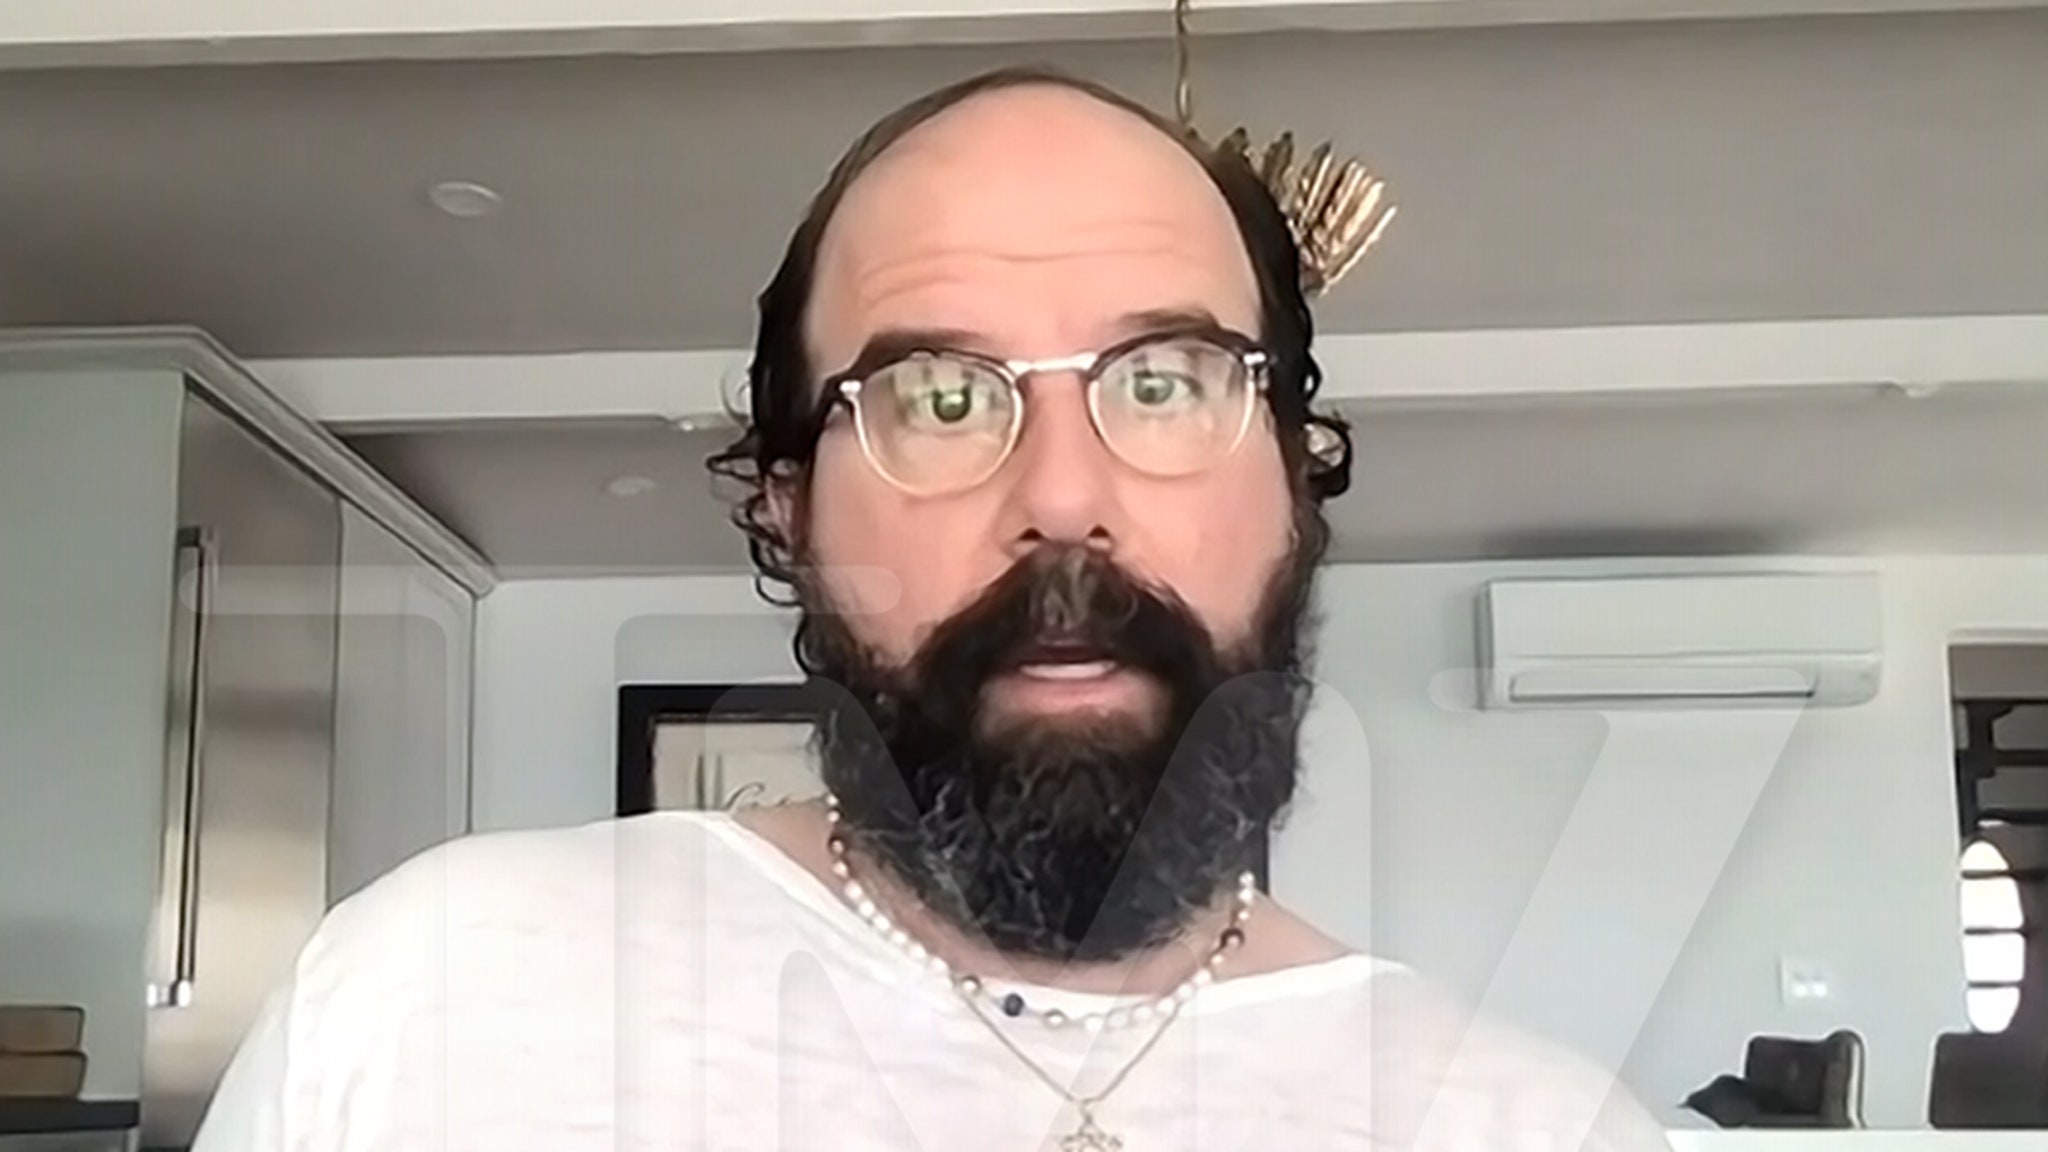 Brett Gelman Slams Bookstores for Canceling Appearances After His Israel Support